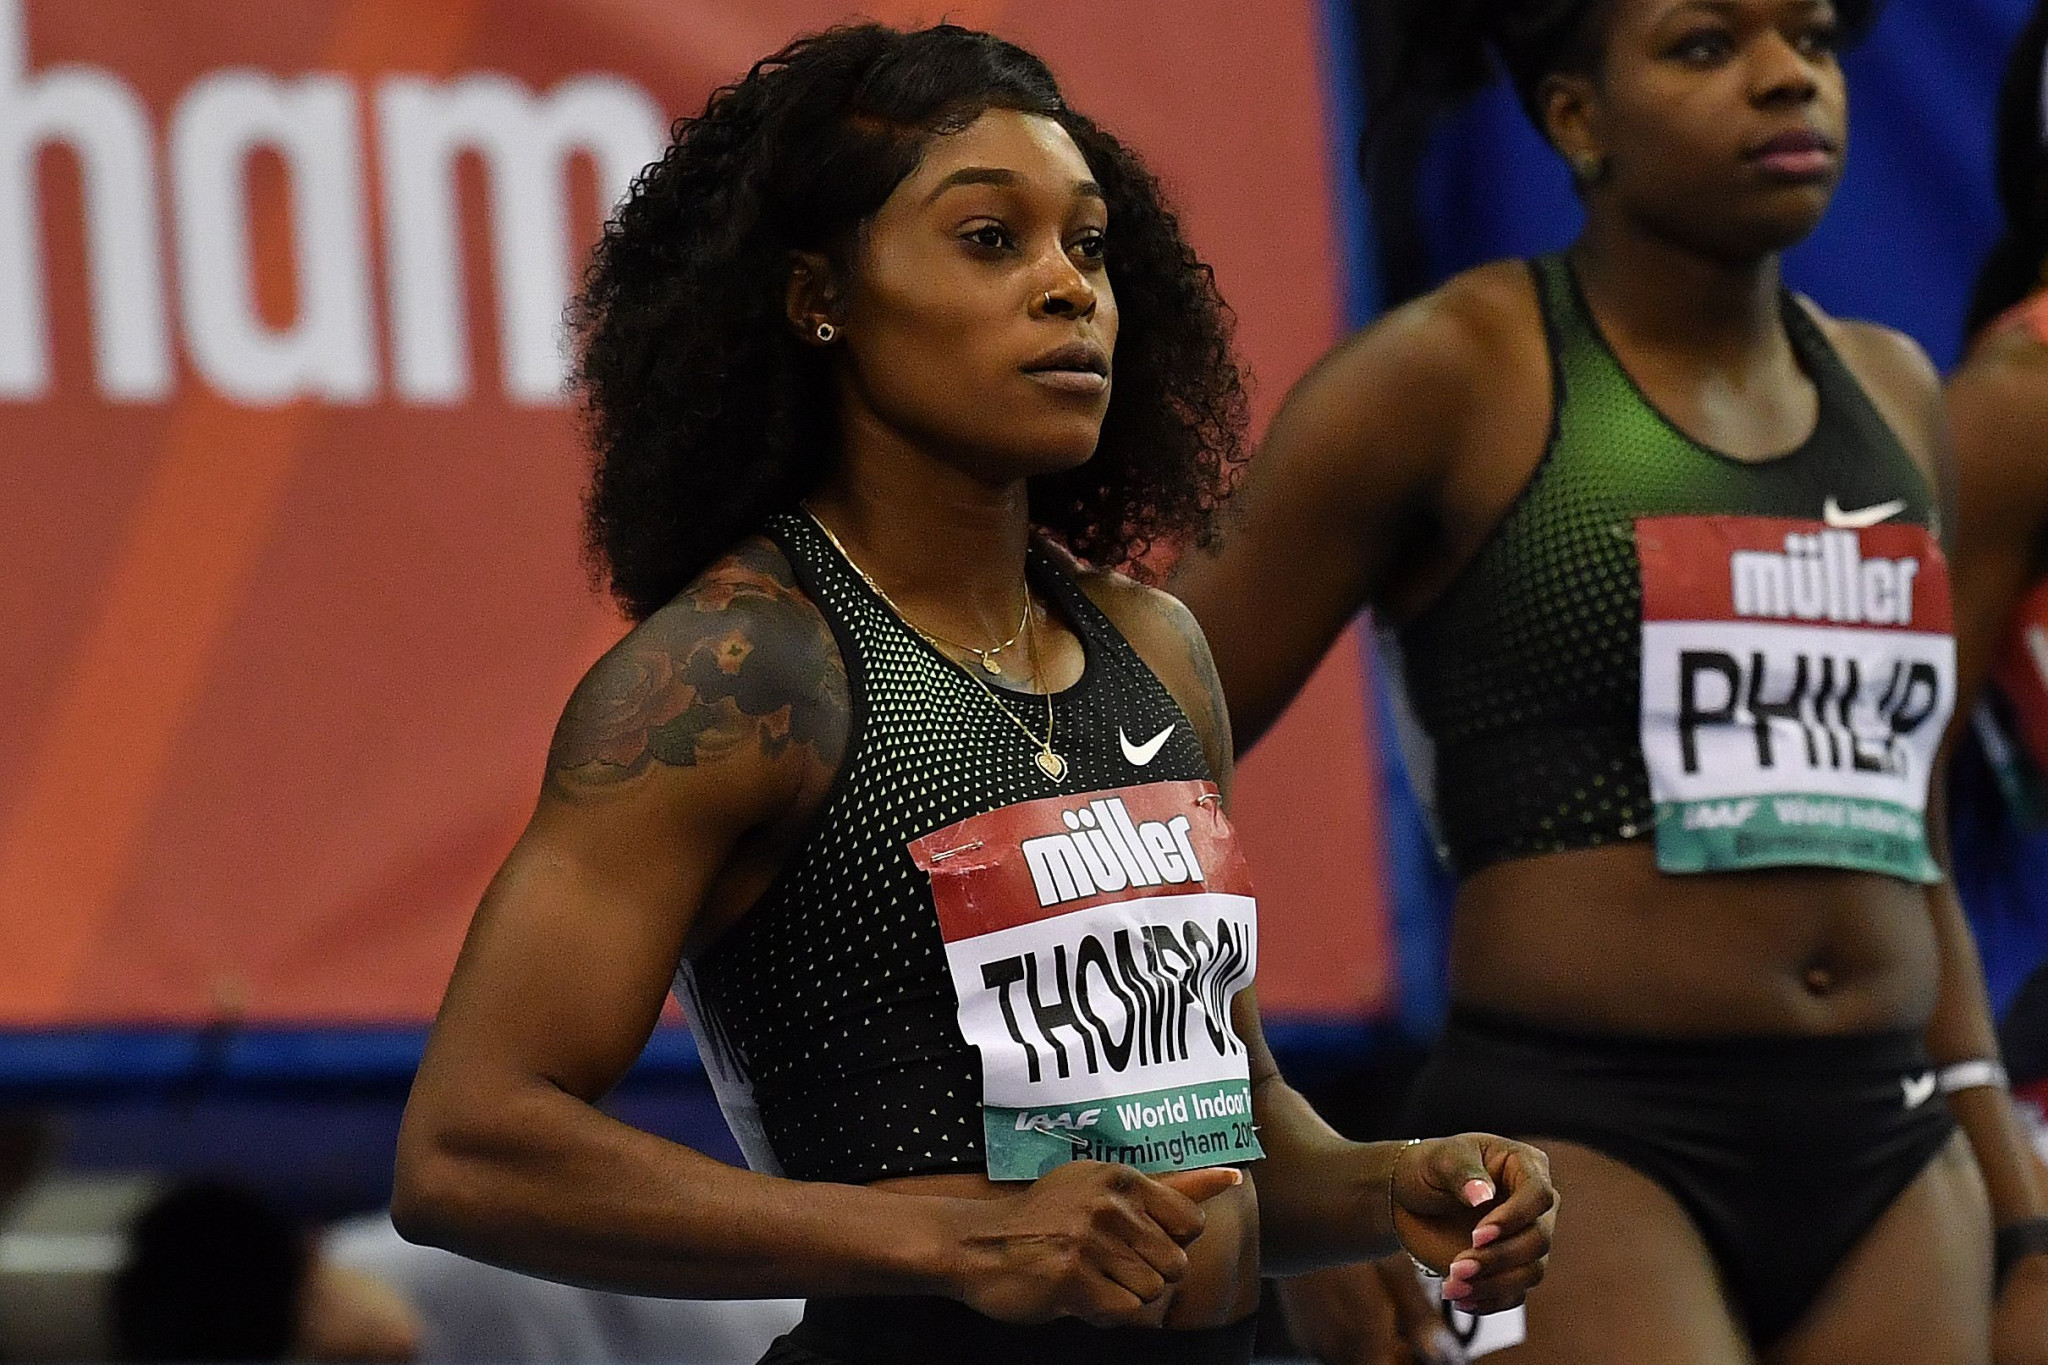 Jamaica's Olympic 100 and 200 metres champion Elaine Thompson faces a strong challenge over the longer distance at tomorrow's IAAF Diamond League meeting in Stockholm ©Getty Images